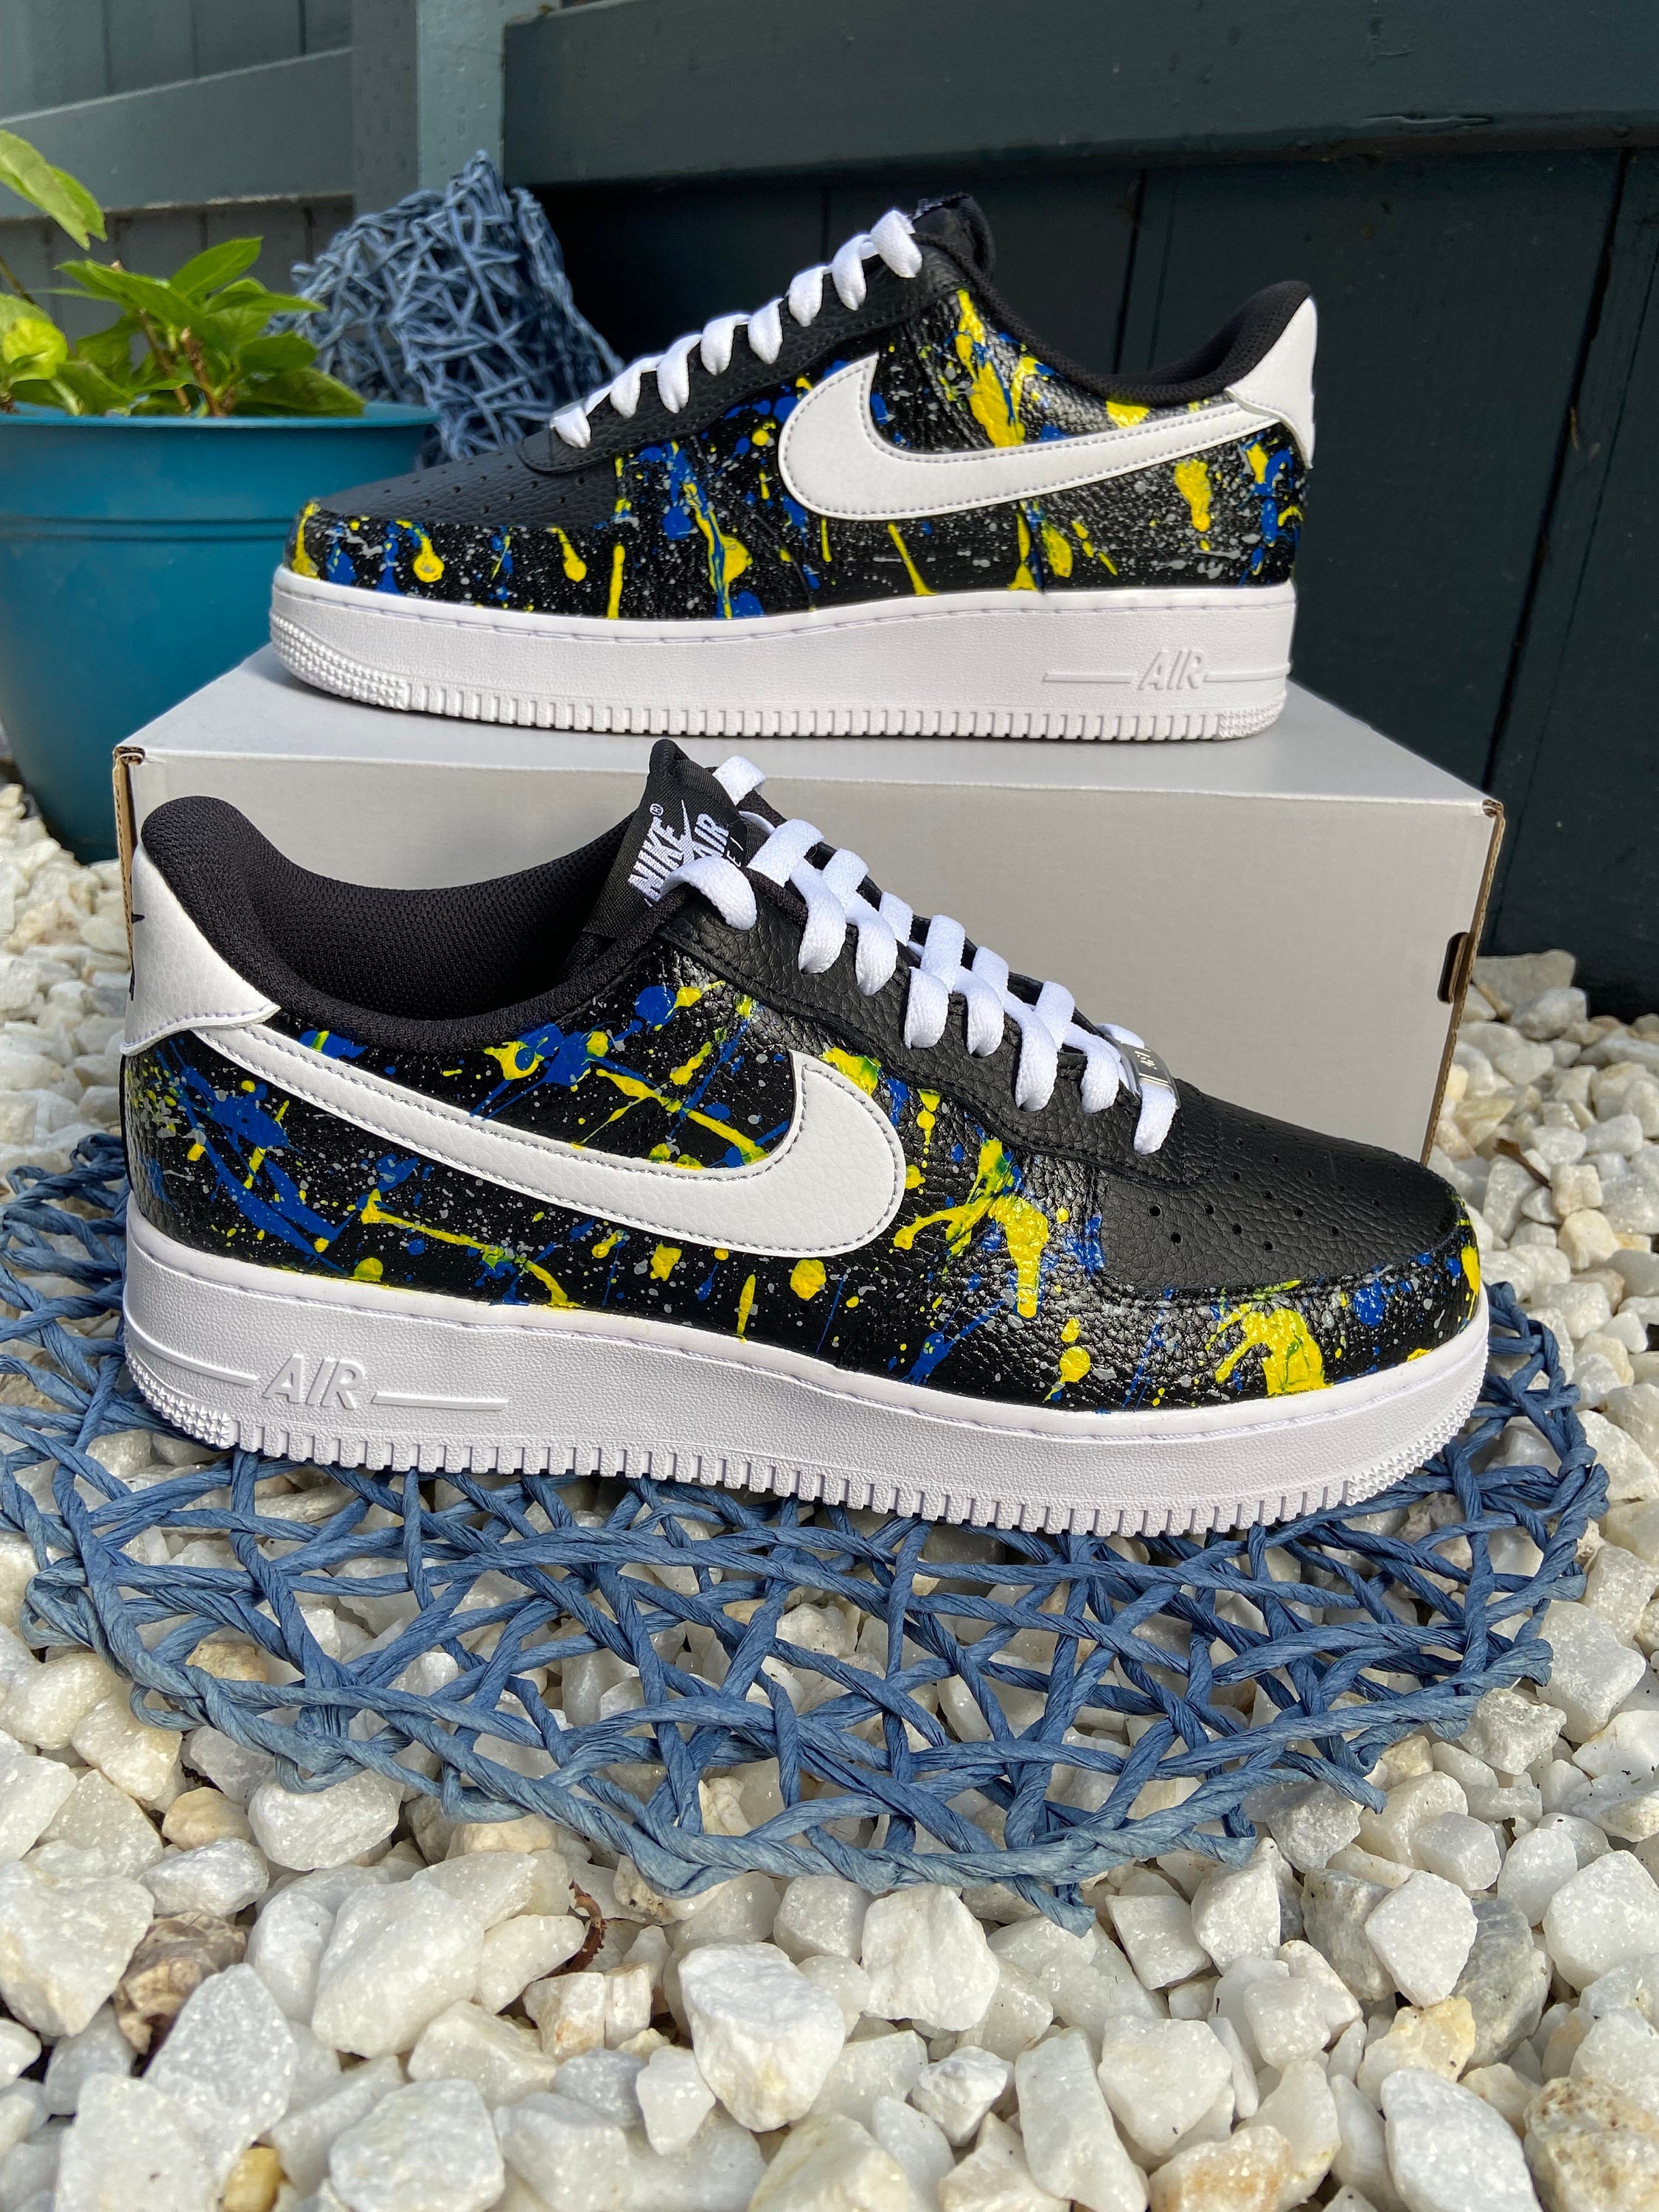 Buy Custom Painted Nike Air Force One Mid-top navy Blue / Gray Online in  India 